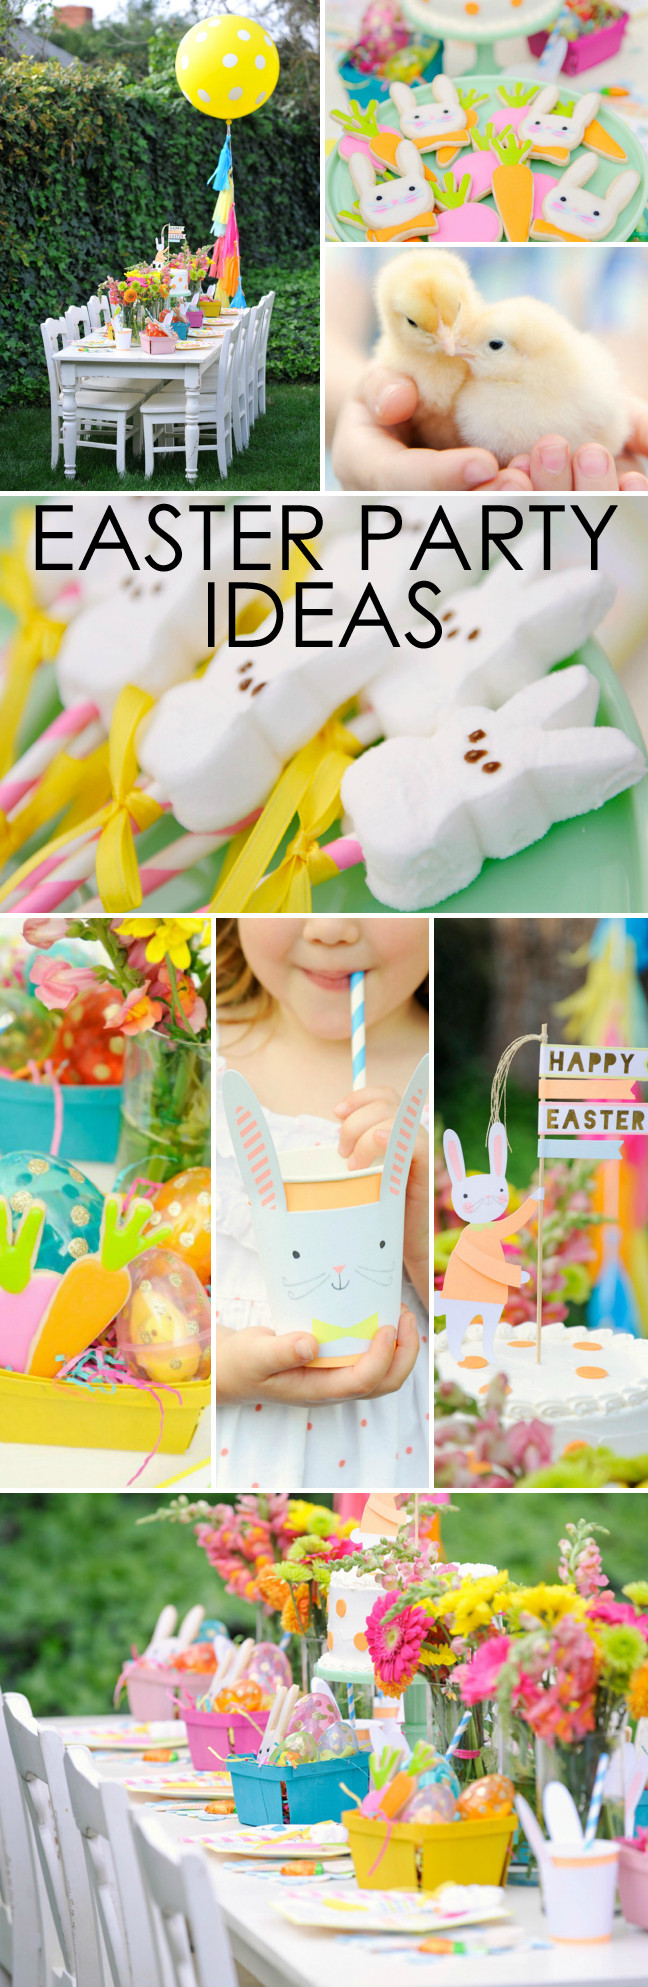 Easter Party Planning Ideas
 Plan a Bunny tastic Kids Easter Party fab